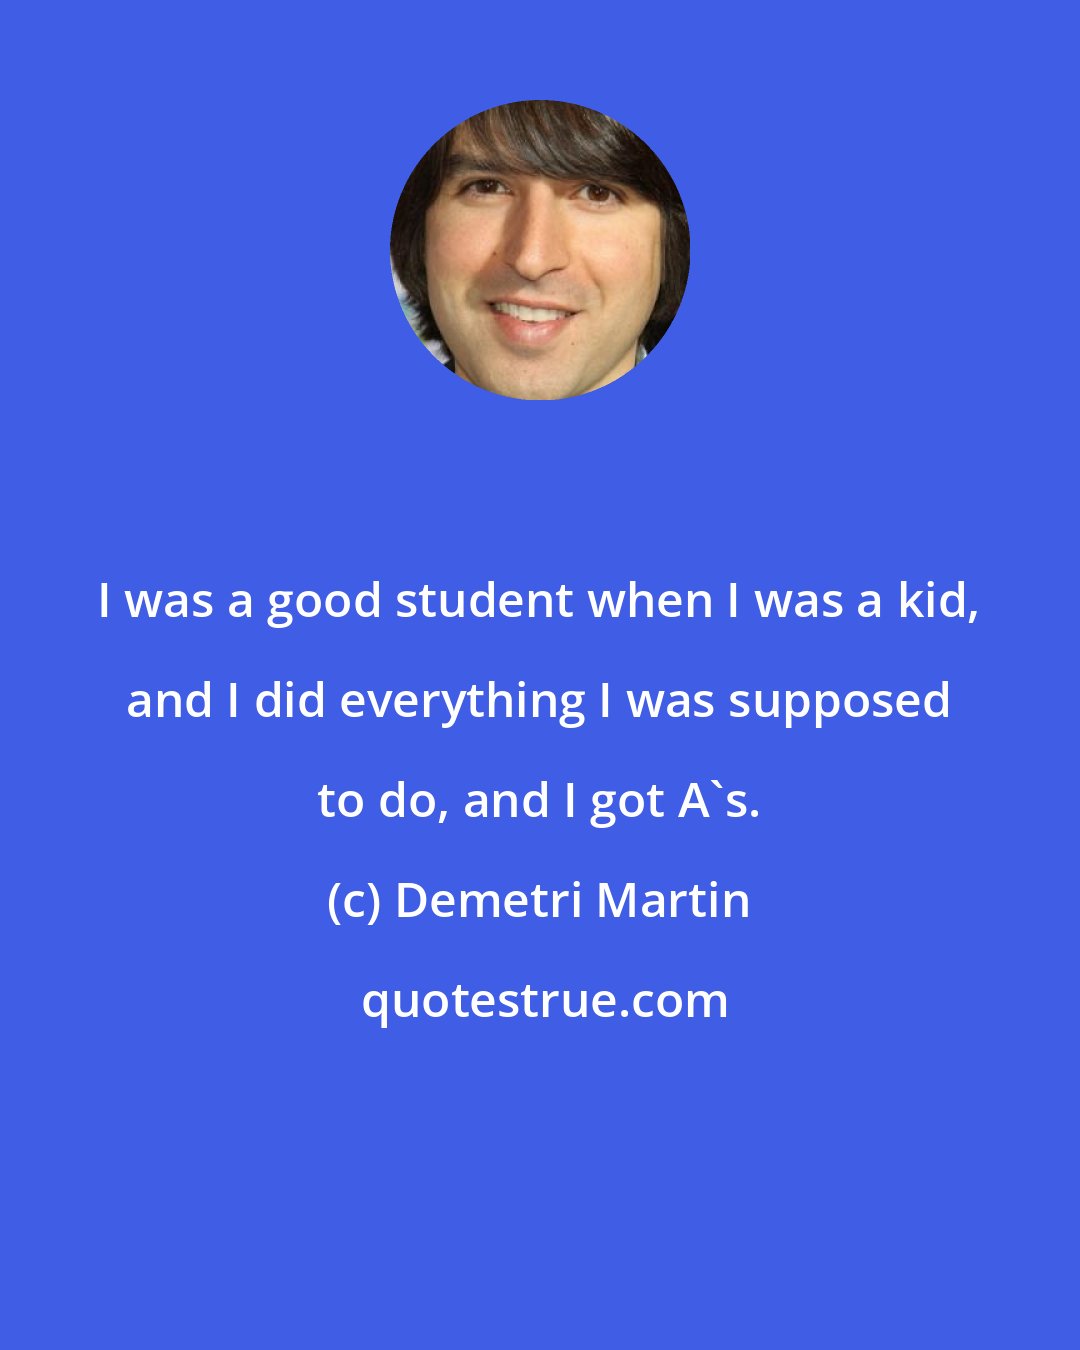 Demetri Martin: I was a good student when I was a kid, and I did everything I was supposed to do, and I got A's.